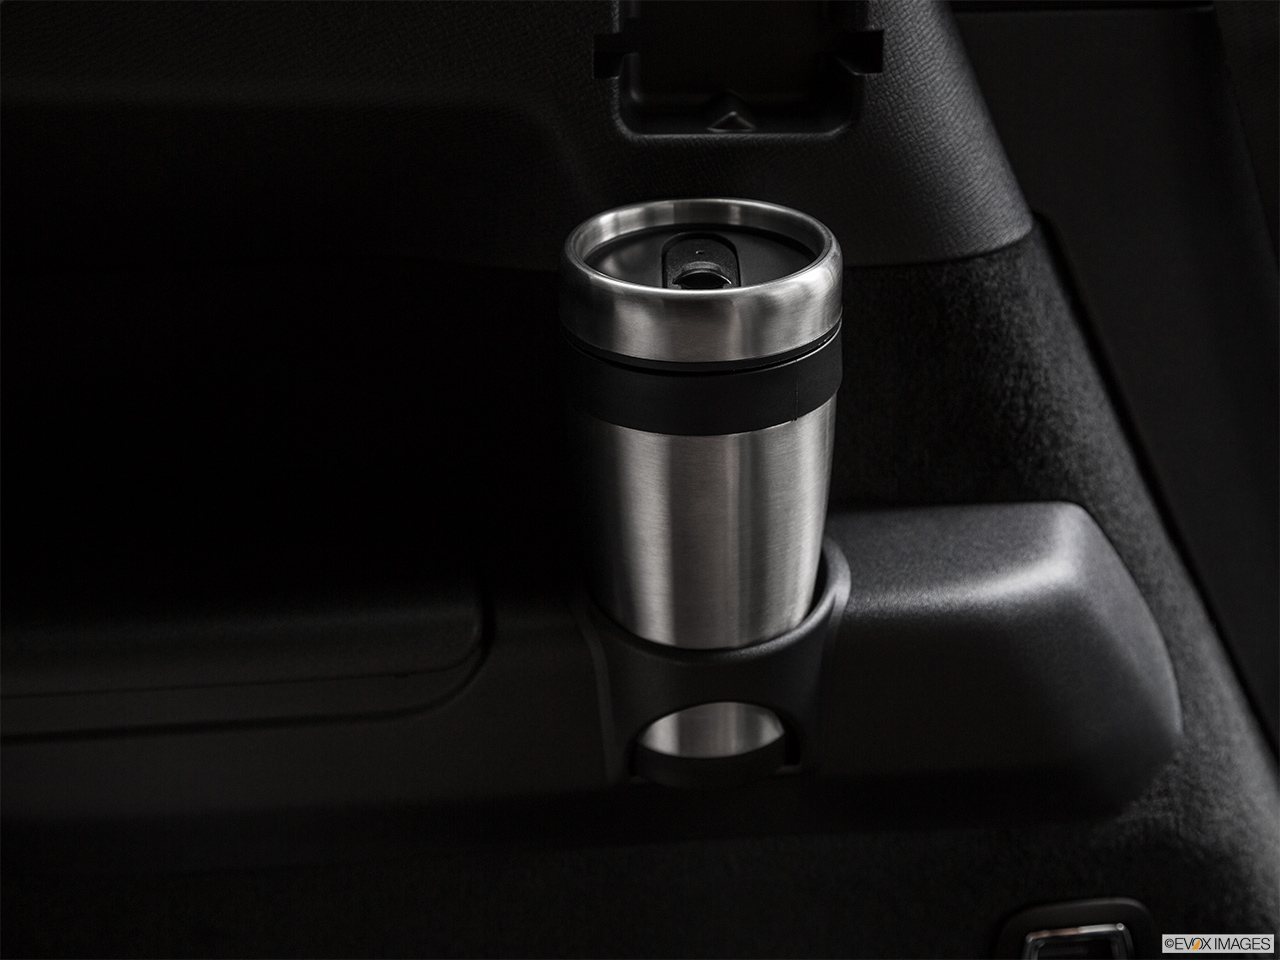 2018 Volvo XC90 T6 Inscription Third Row side cup holder with coffee prop. 